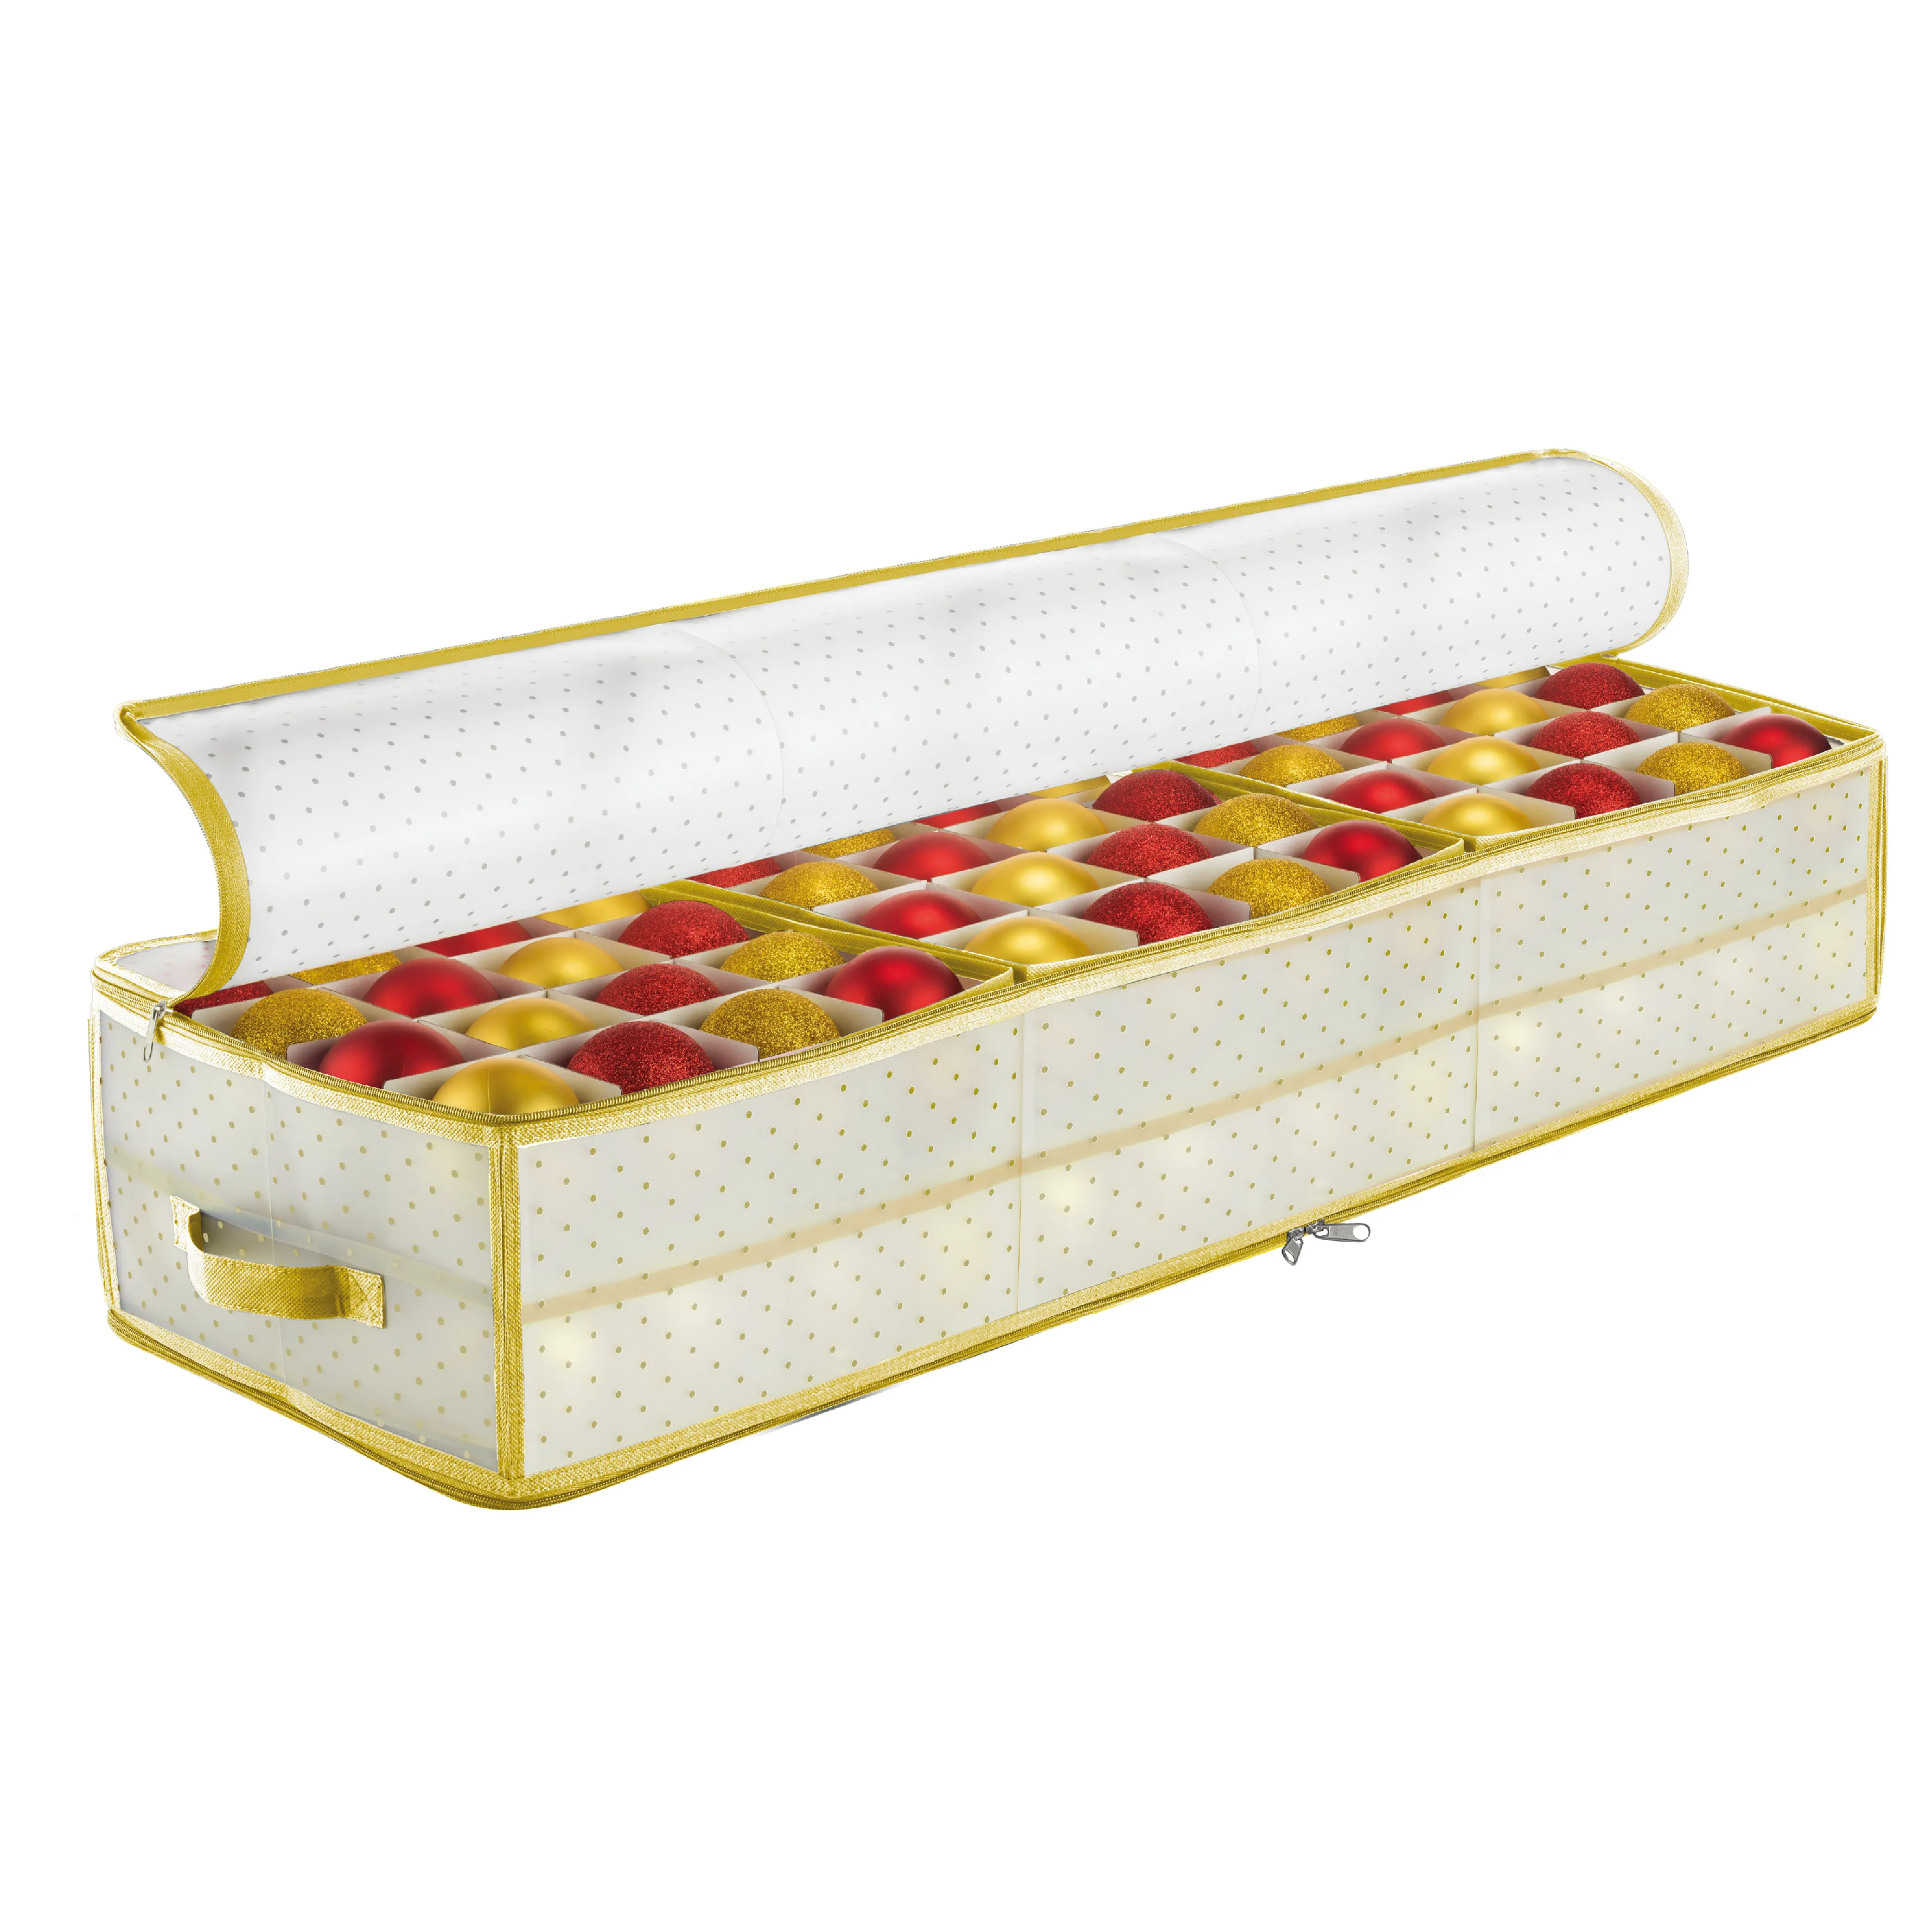 96 Ornament Storage Box Christmas Storage Ball Box With Paper Dividers And Golden Trim Edge